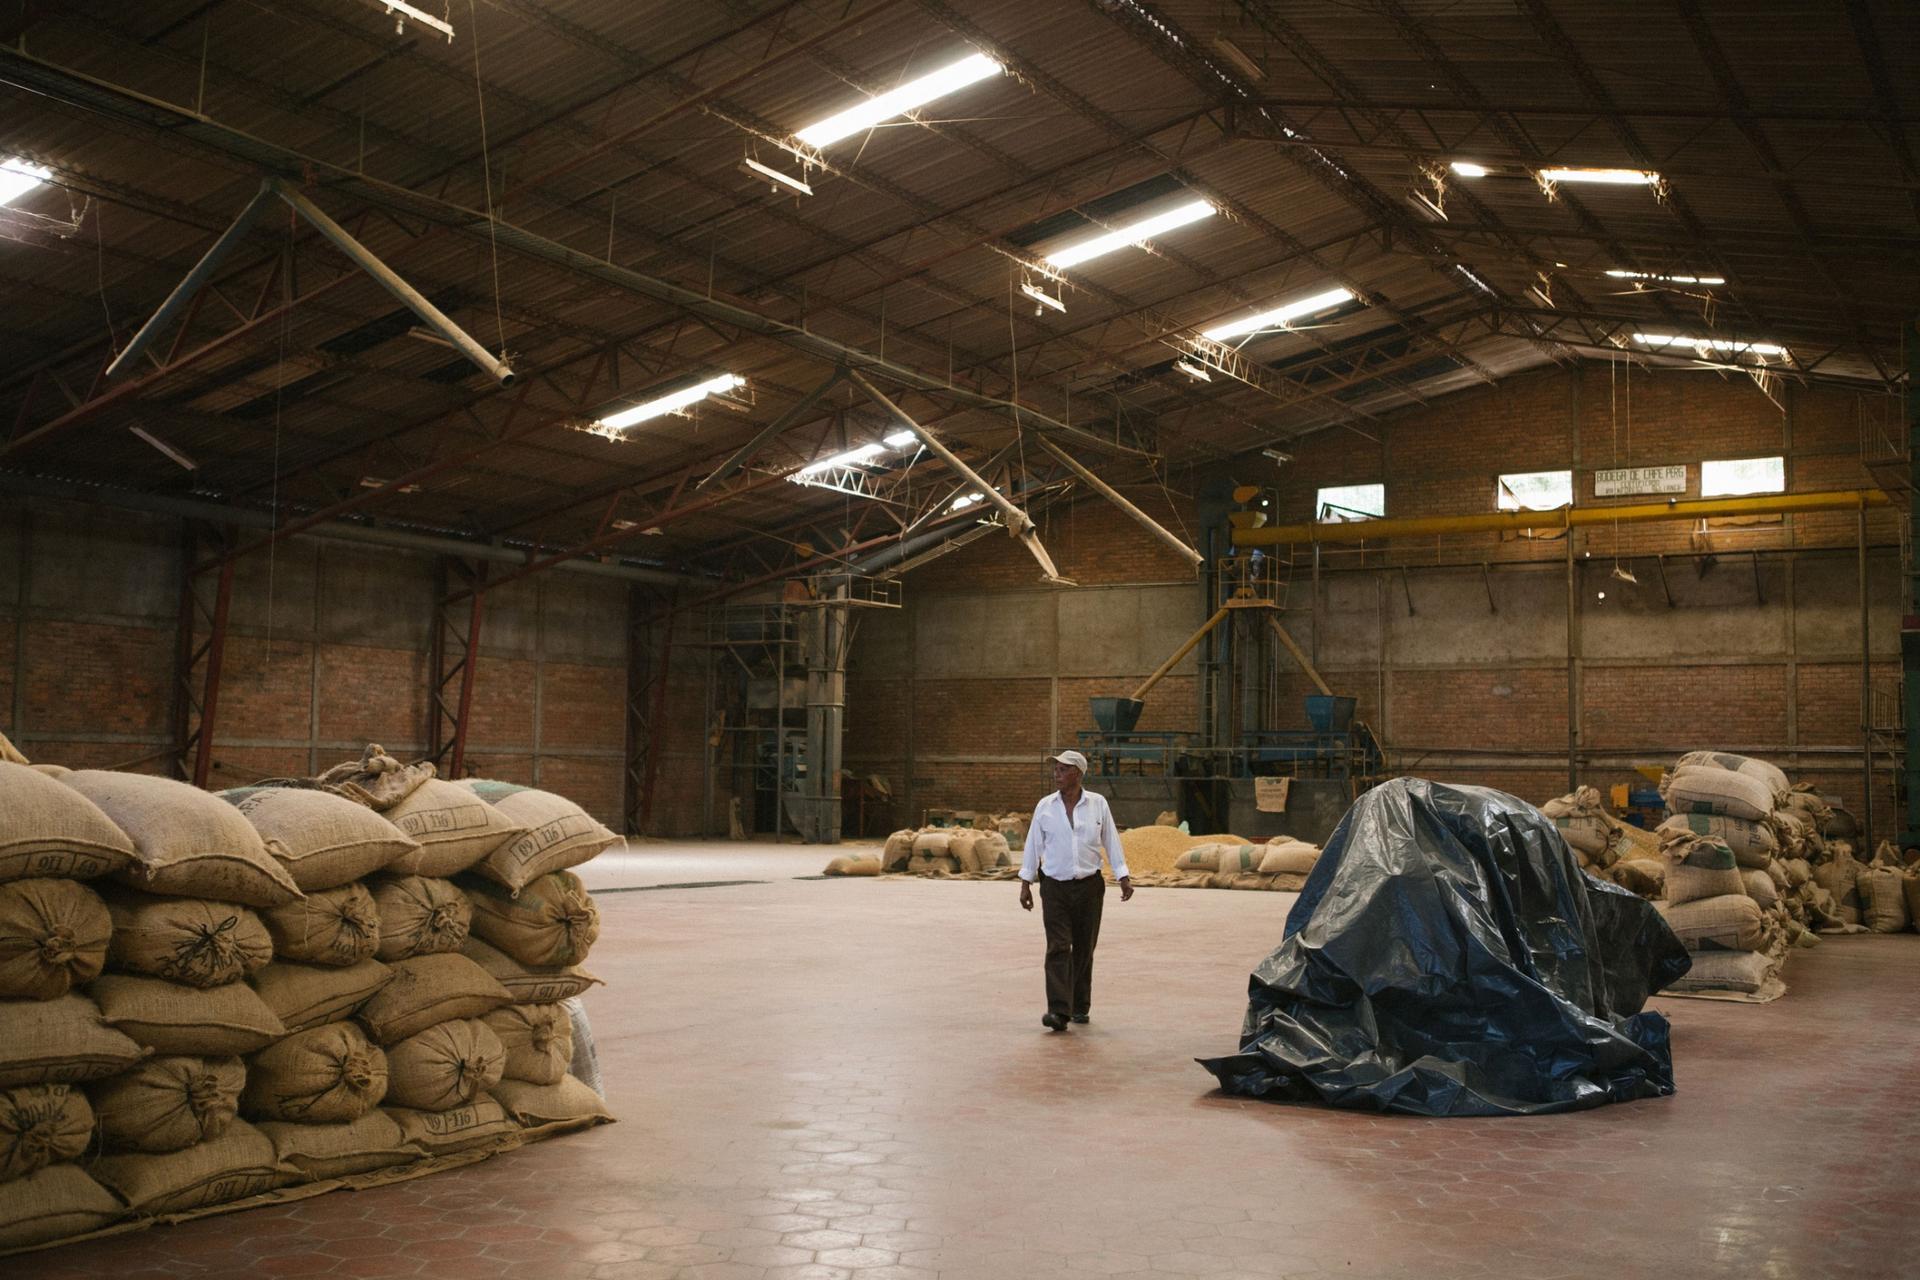 A man wearing a white shirt is shown walking through a large warehouse with large bags of coffee stacked.